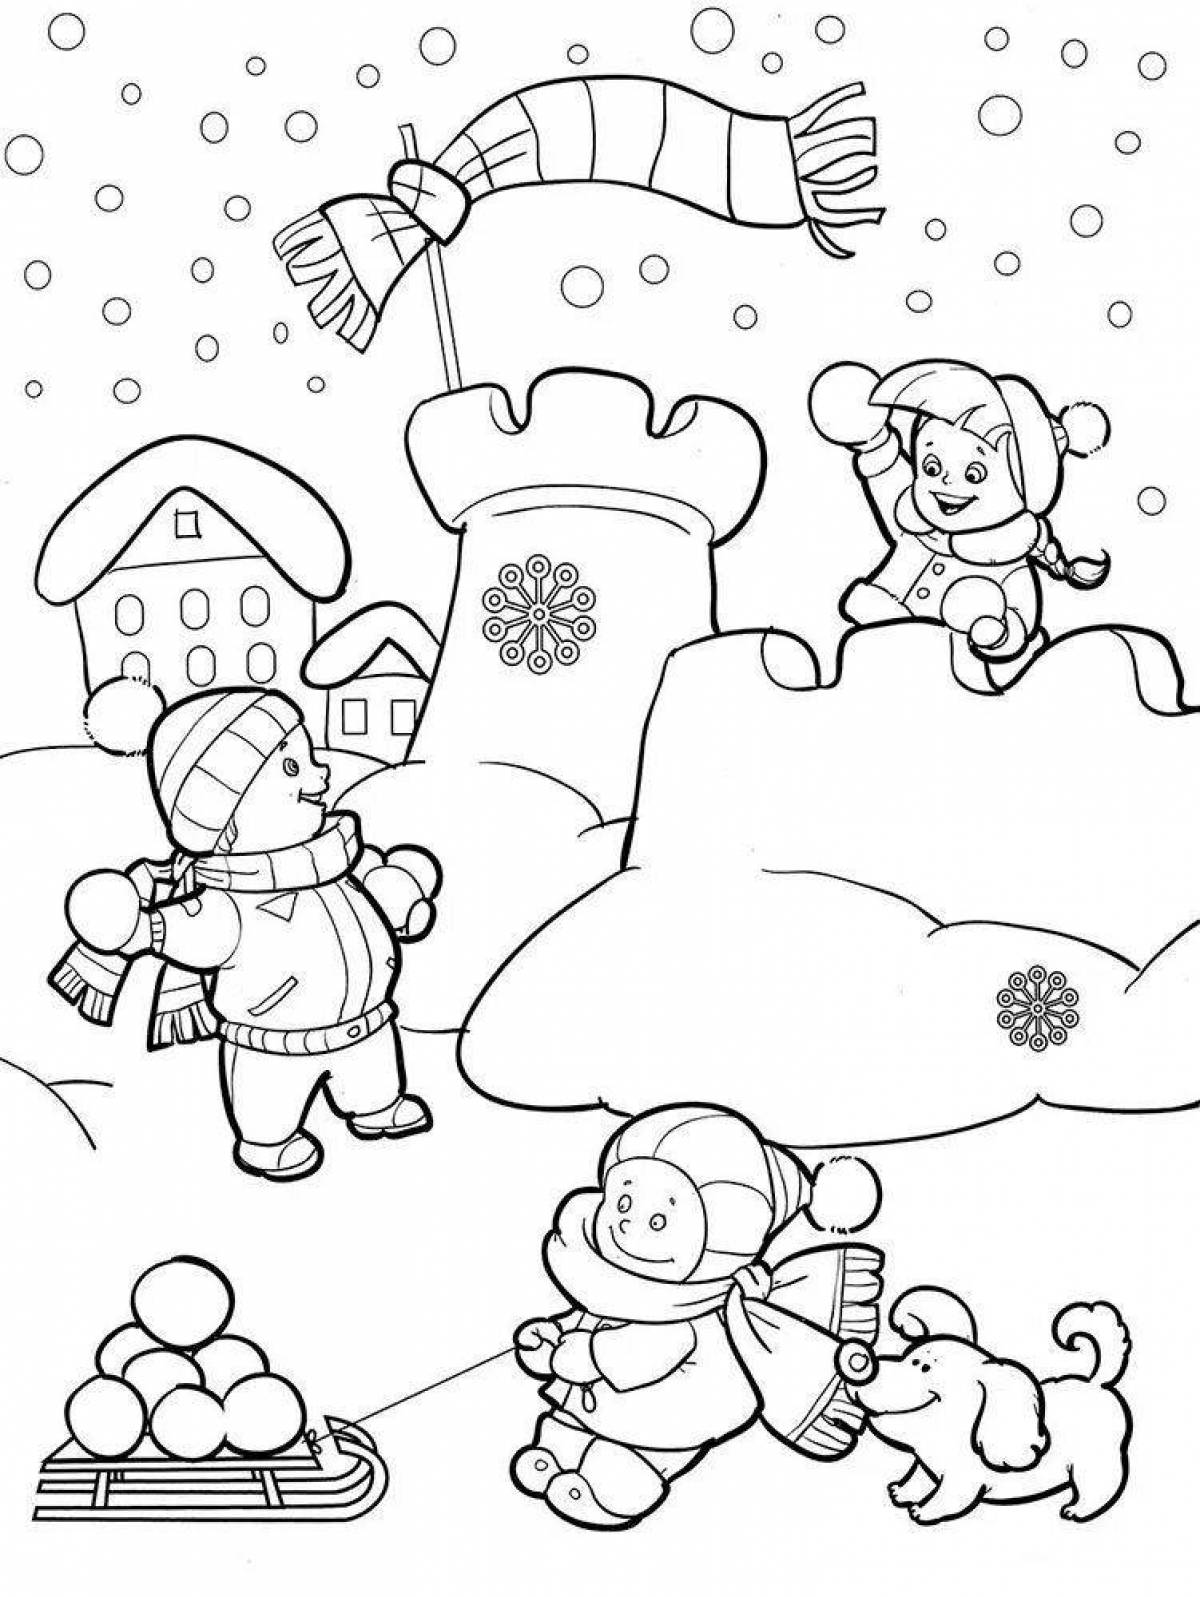 Attracting kystin sureti coloring pages